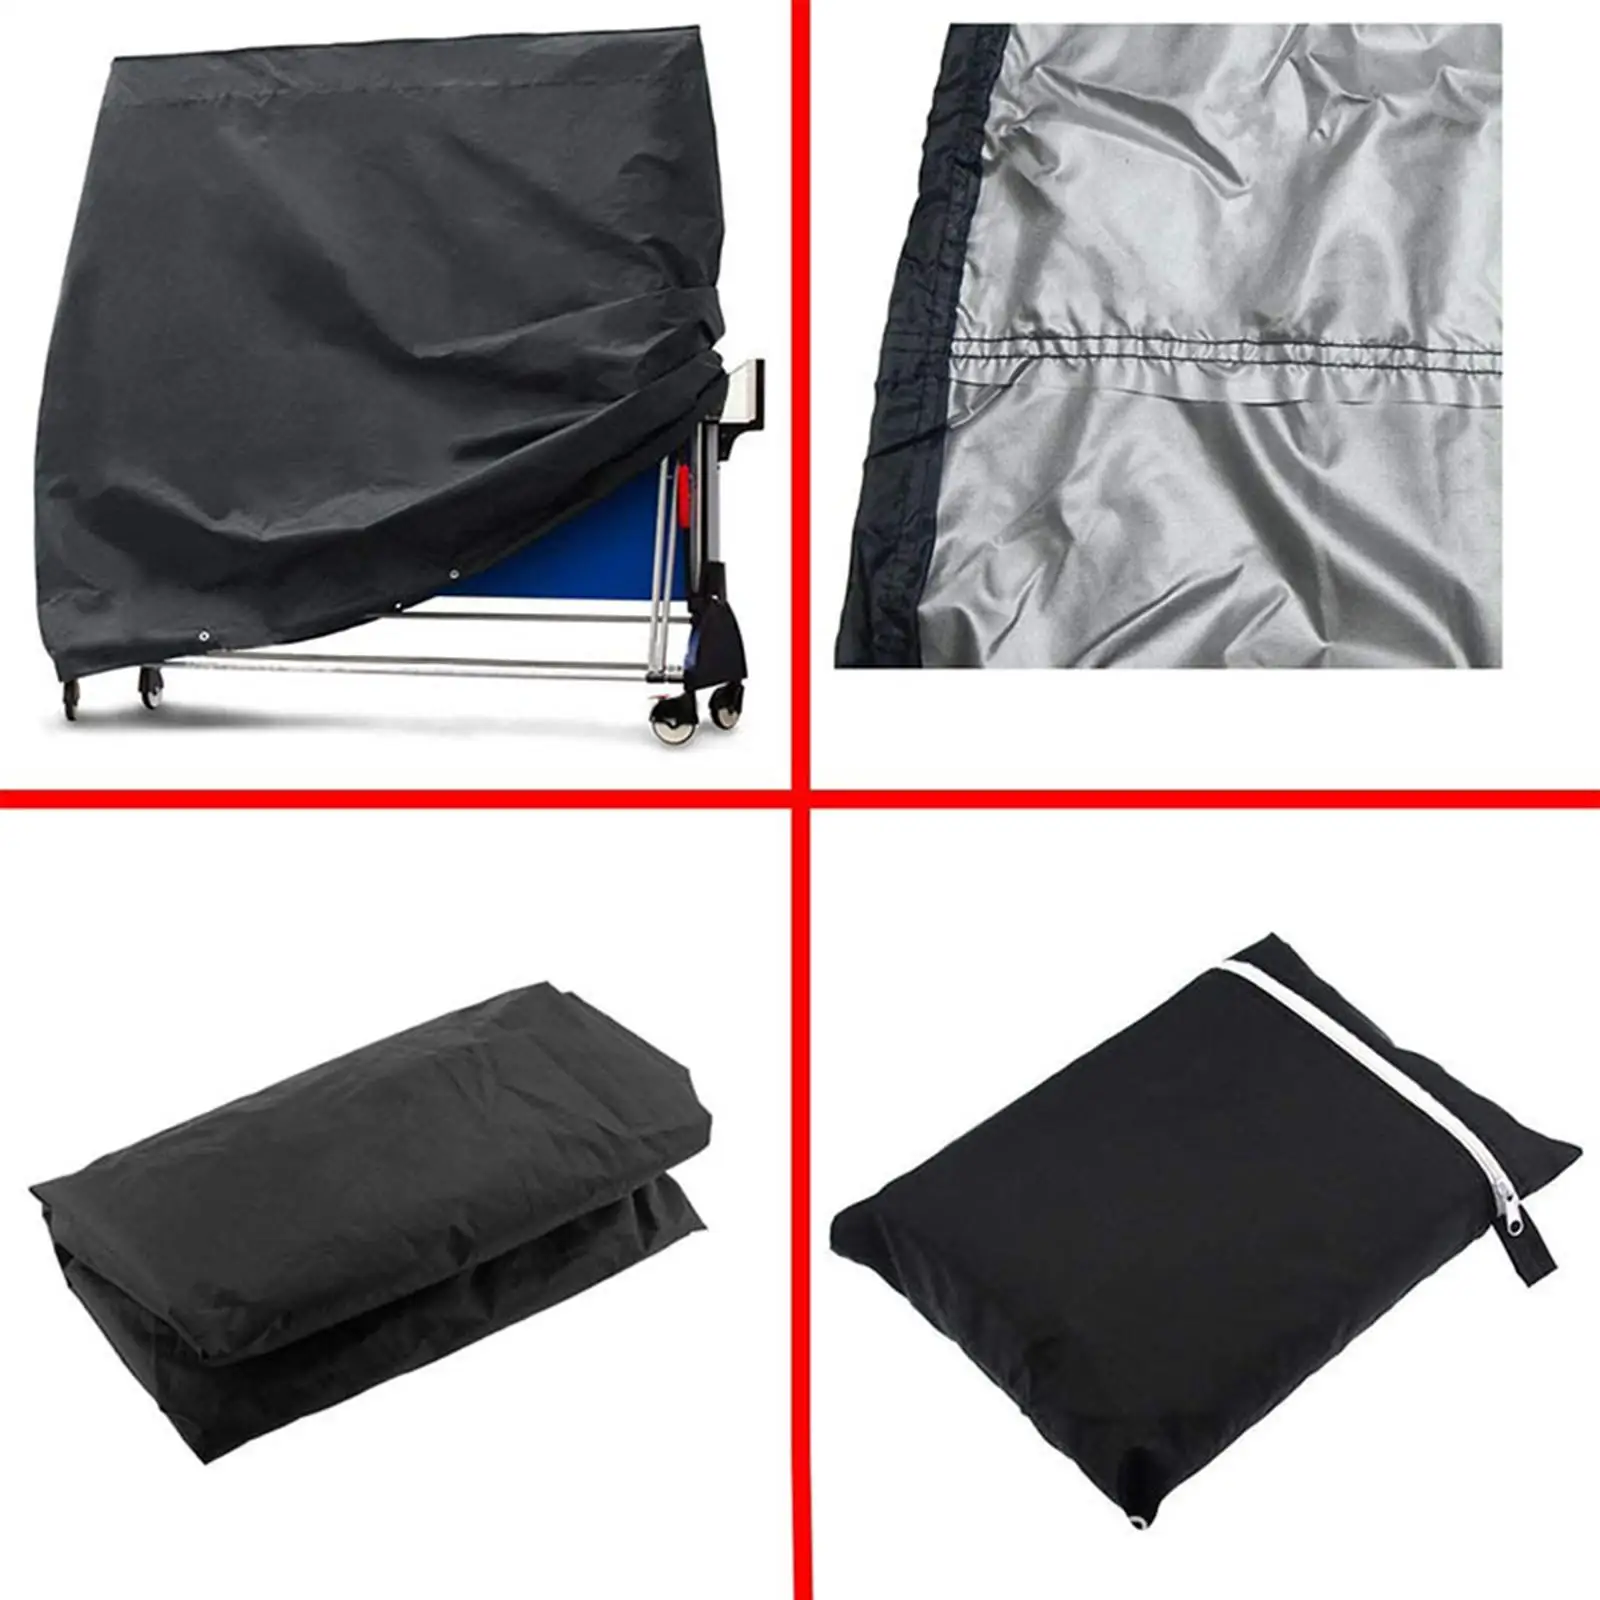 Table Tennis Table Dust Covers Durable Portable Lightweight Unique Rain Resistant Collapsible for Garage Outdoor Accessories